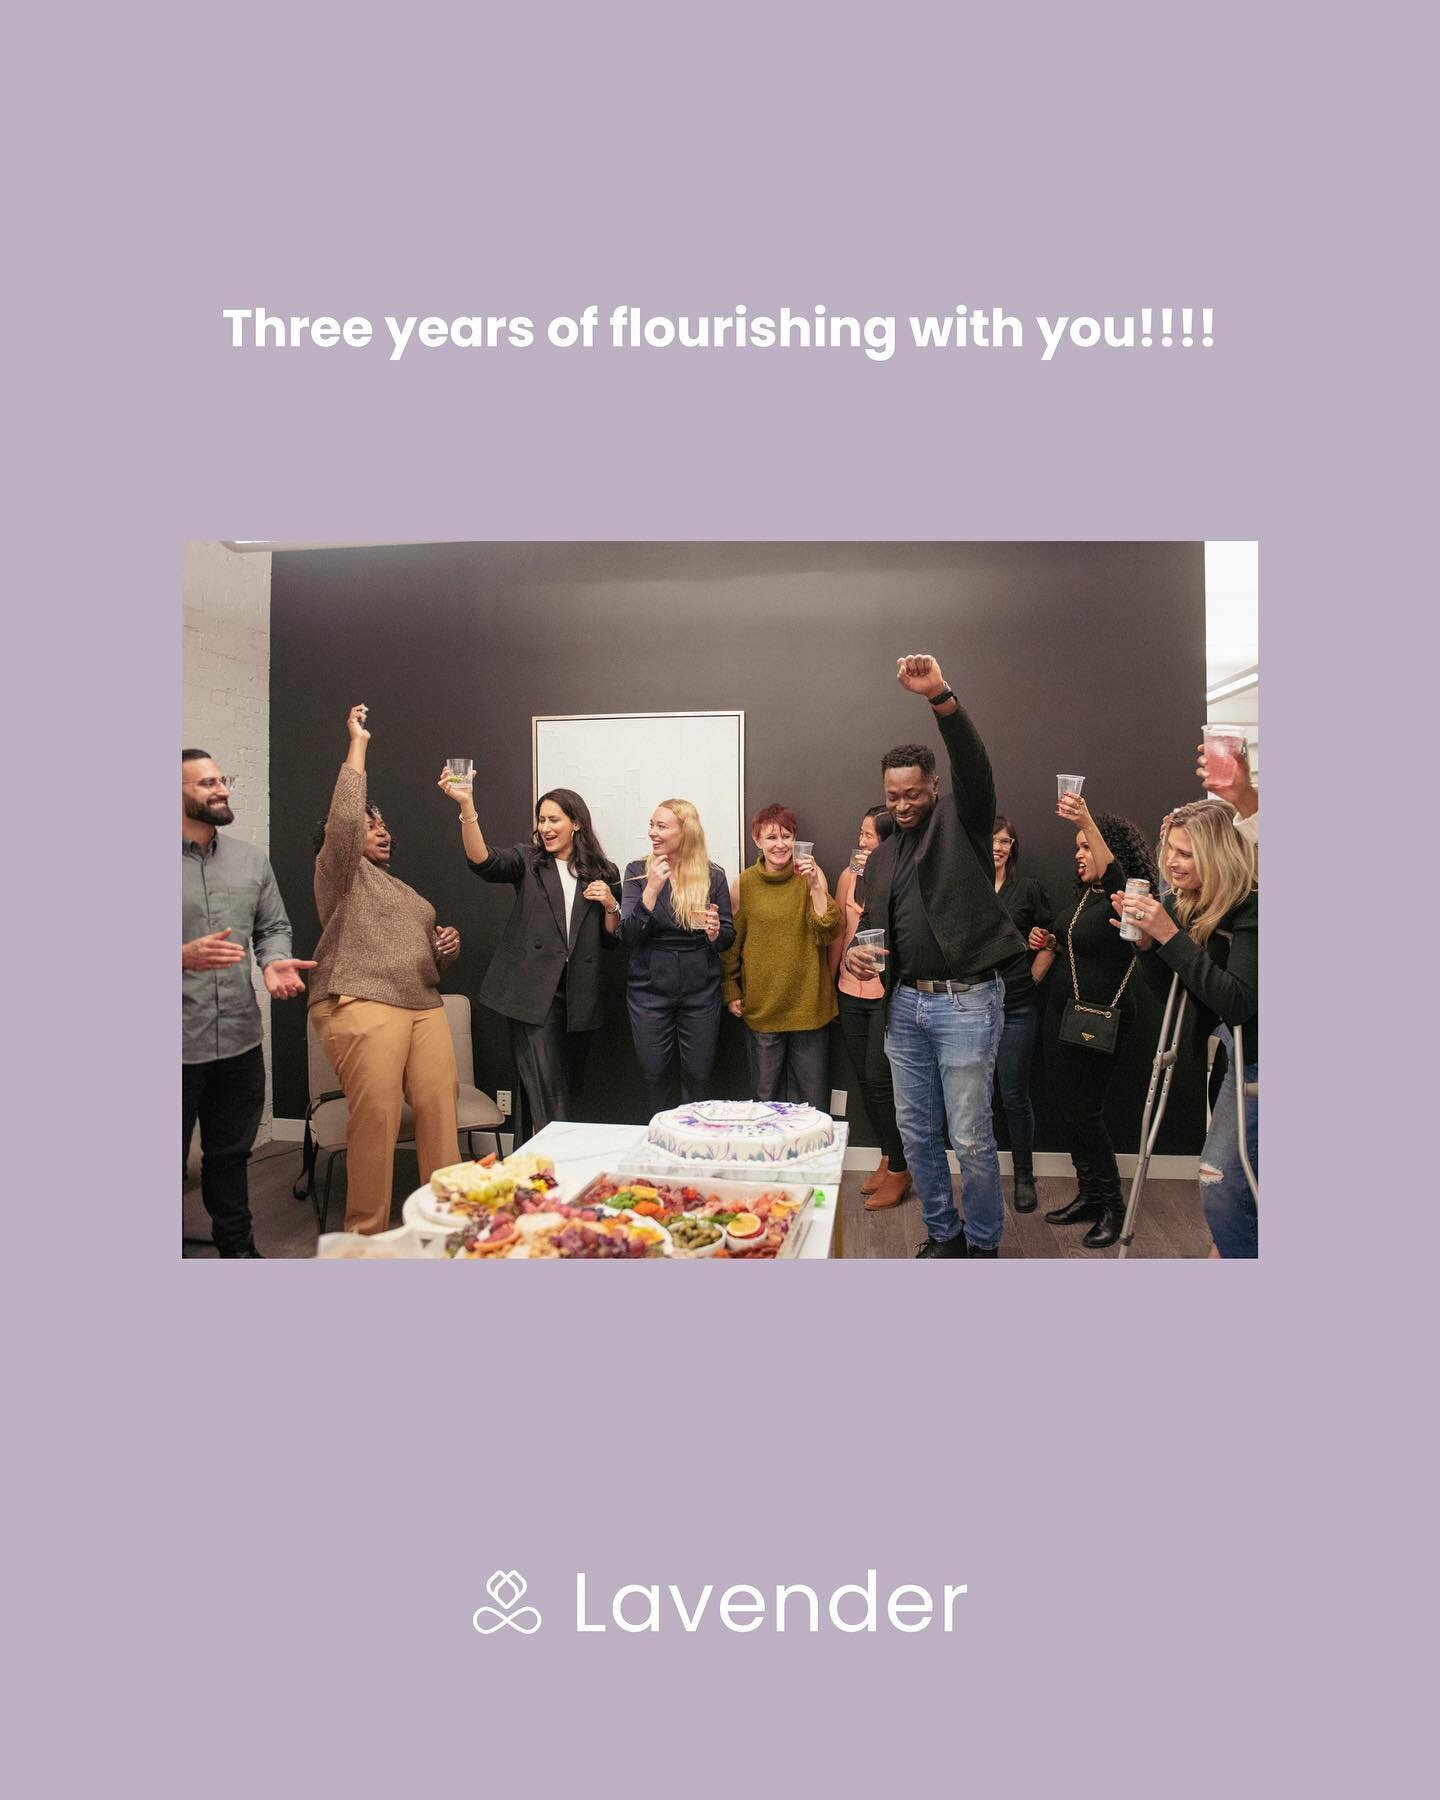 Today is our THIRD anniversary! Three years ago today @pritma &amp; @brigyfoxx began taking clients for the first time💜surreal to think three years later we are celebrating as a growing team in Mexico! Swipe through for a glimpse of 2023, 2022, 2021